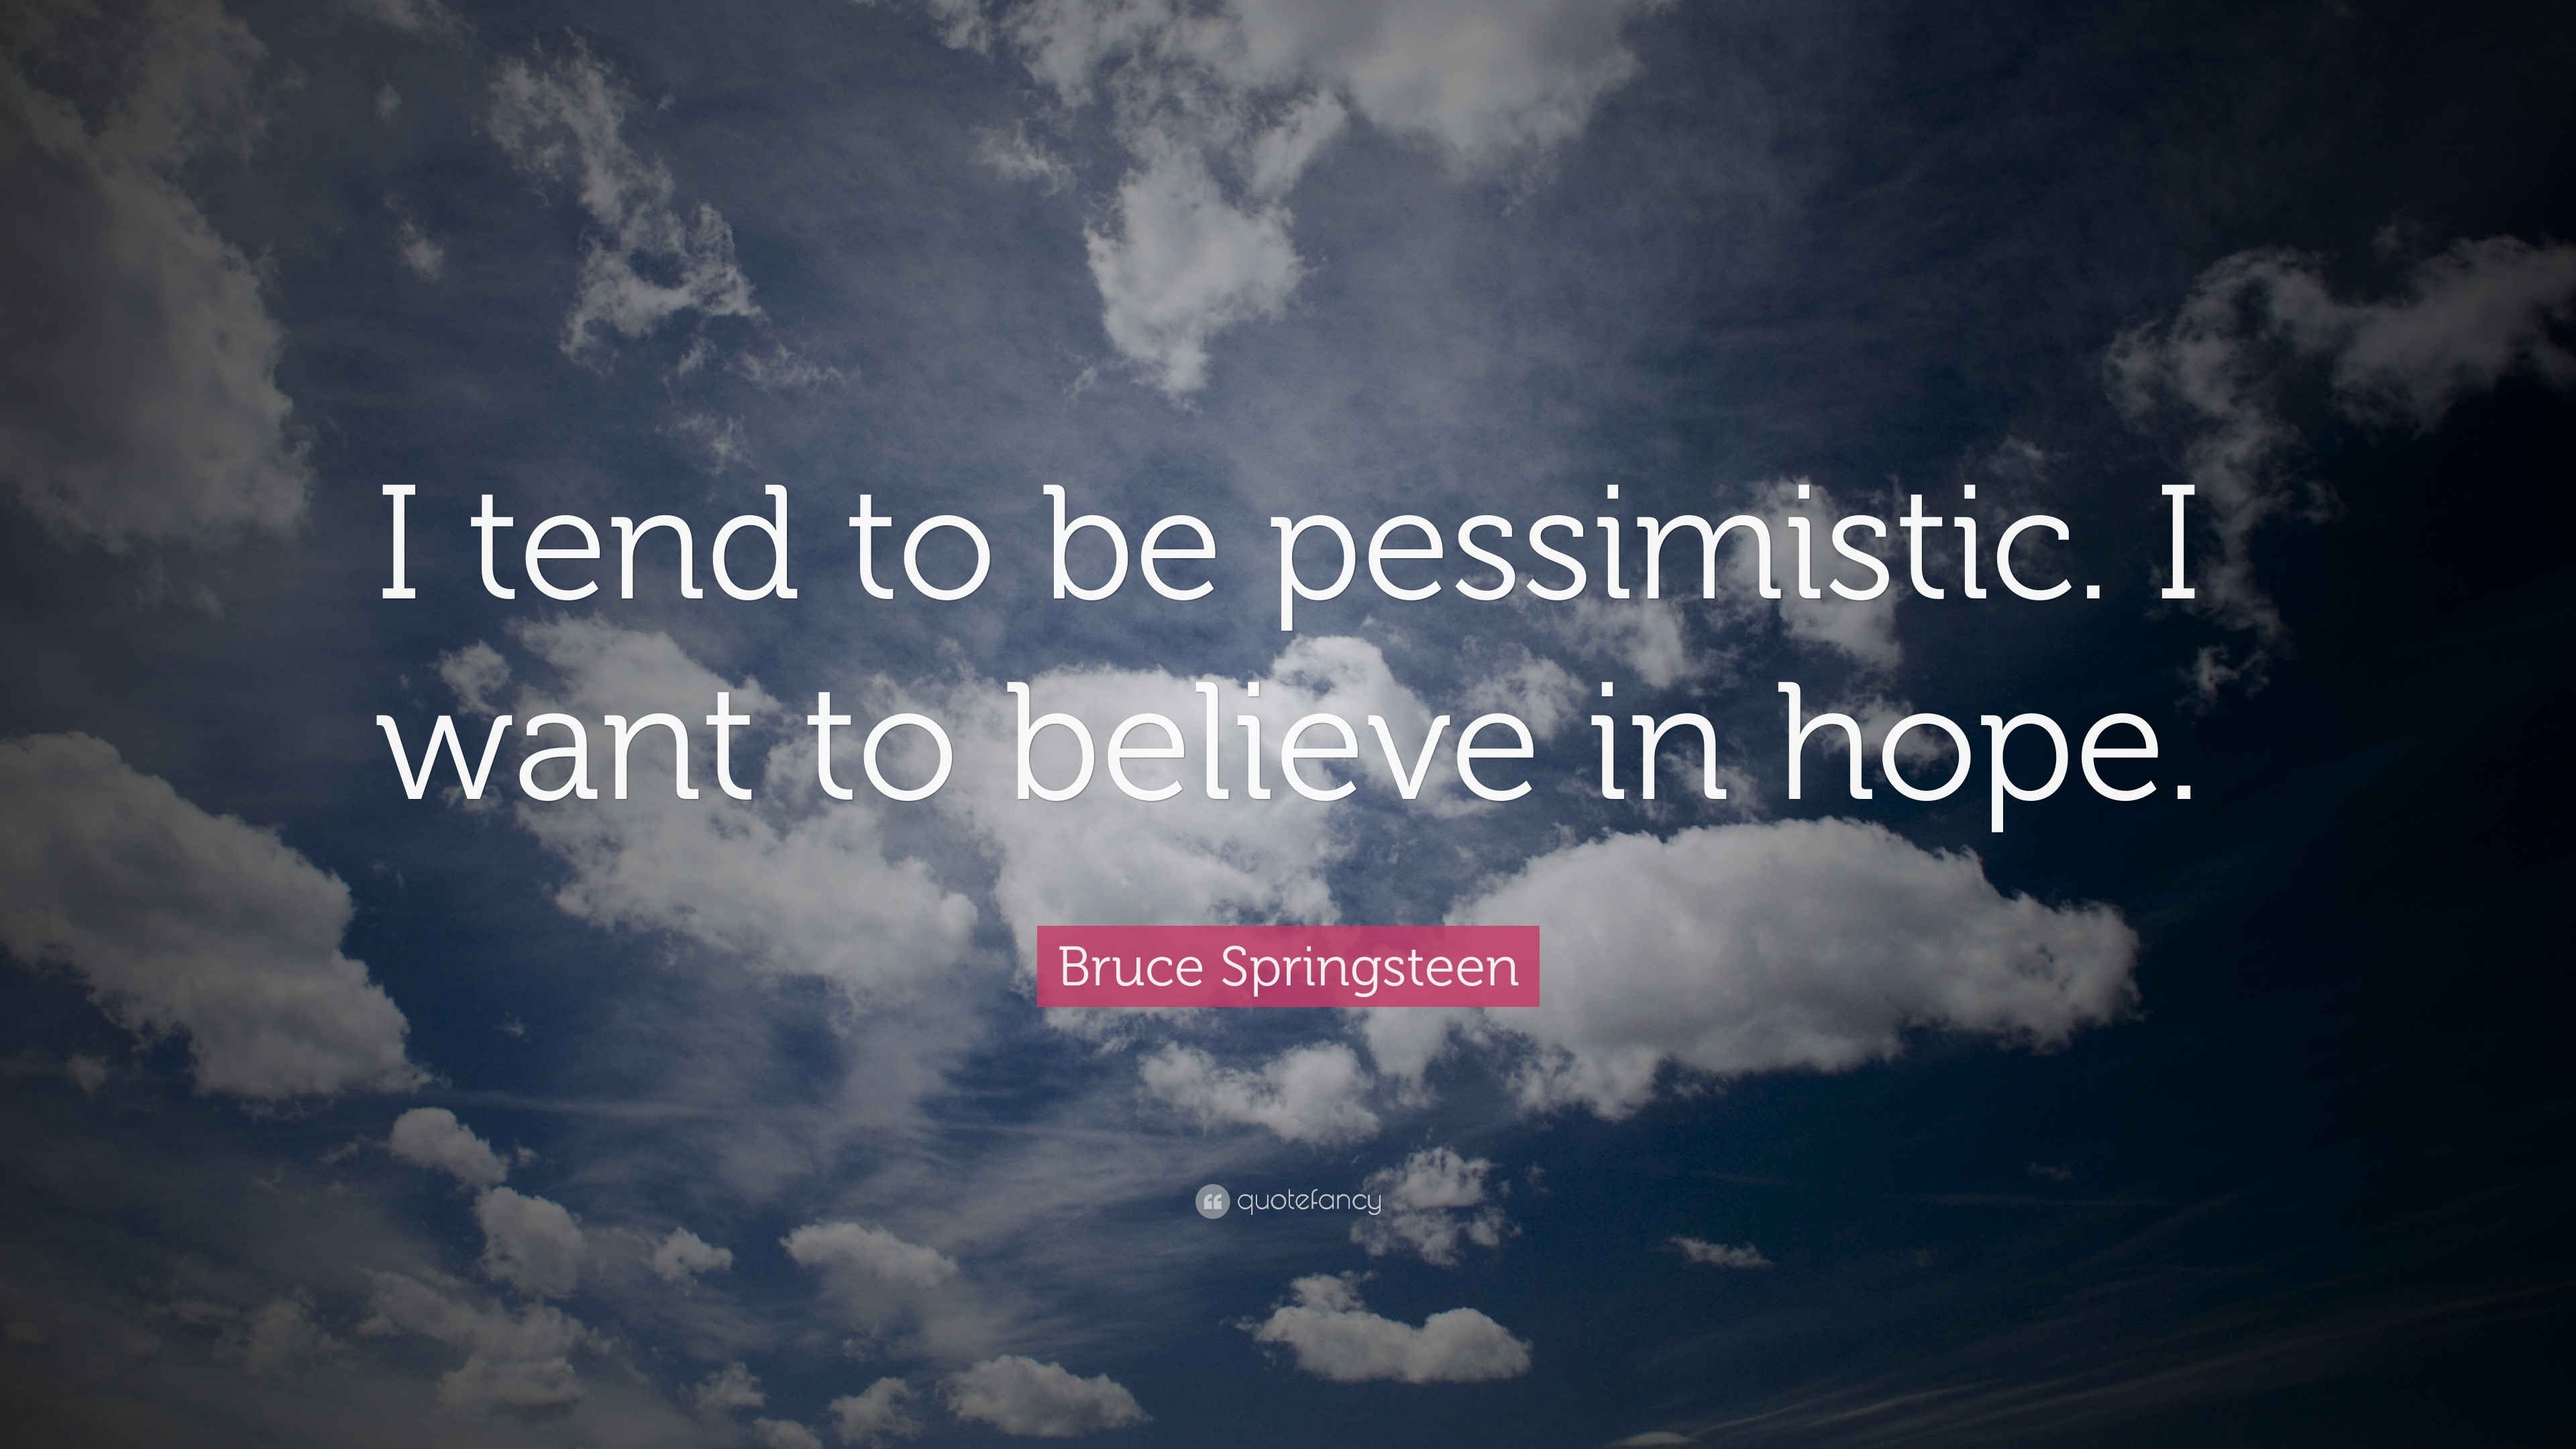 3840x2160 Bruce Springsteen Quote: “I tend to be pessimistic. I want to believe in